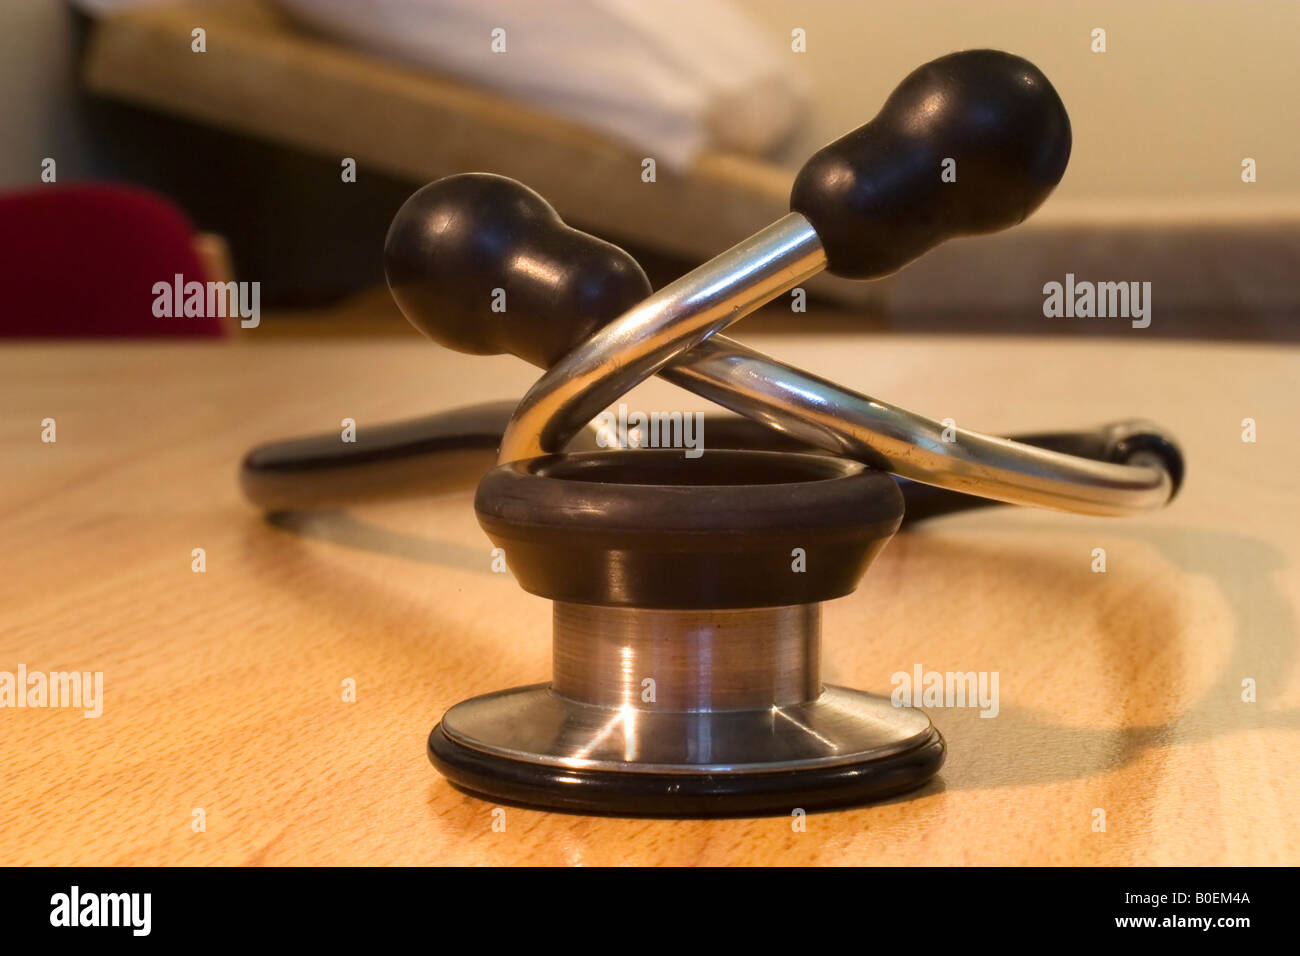 Doctor's GP family physician consulting room office showing stethoscope and examination couch England Great Britain GB UK Stock Photo